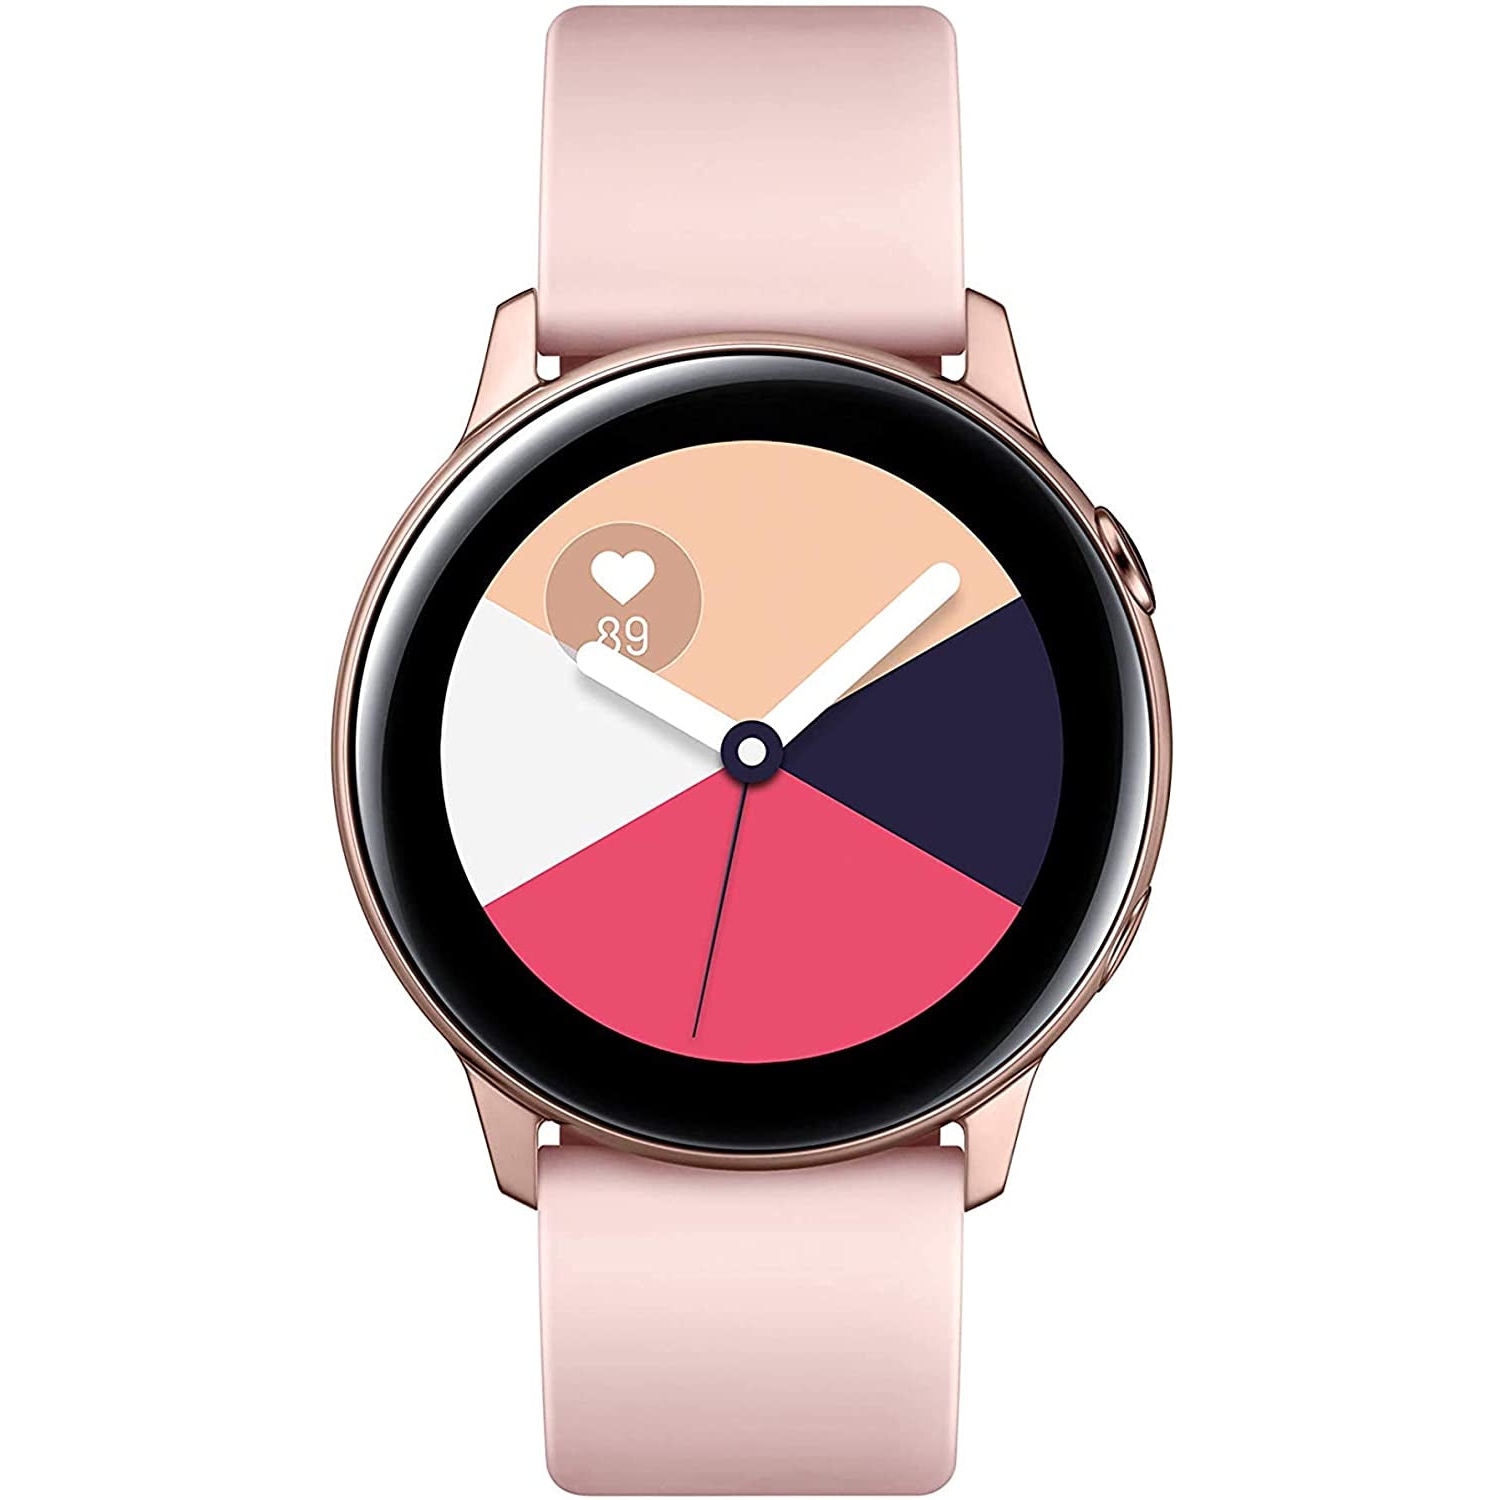 Samsung Galaxy Watch Active (40Mm, GPS, Bluetooth), Rose Gold - US Version with Warranty, 40 Millimetre